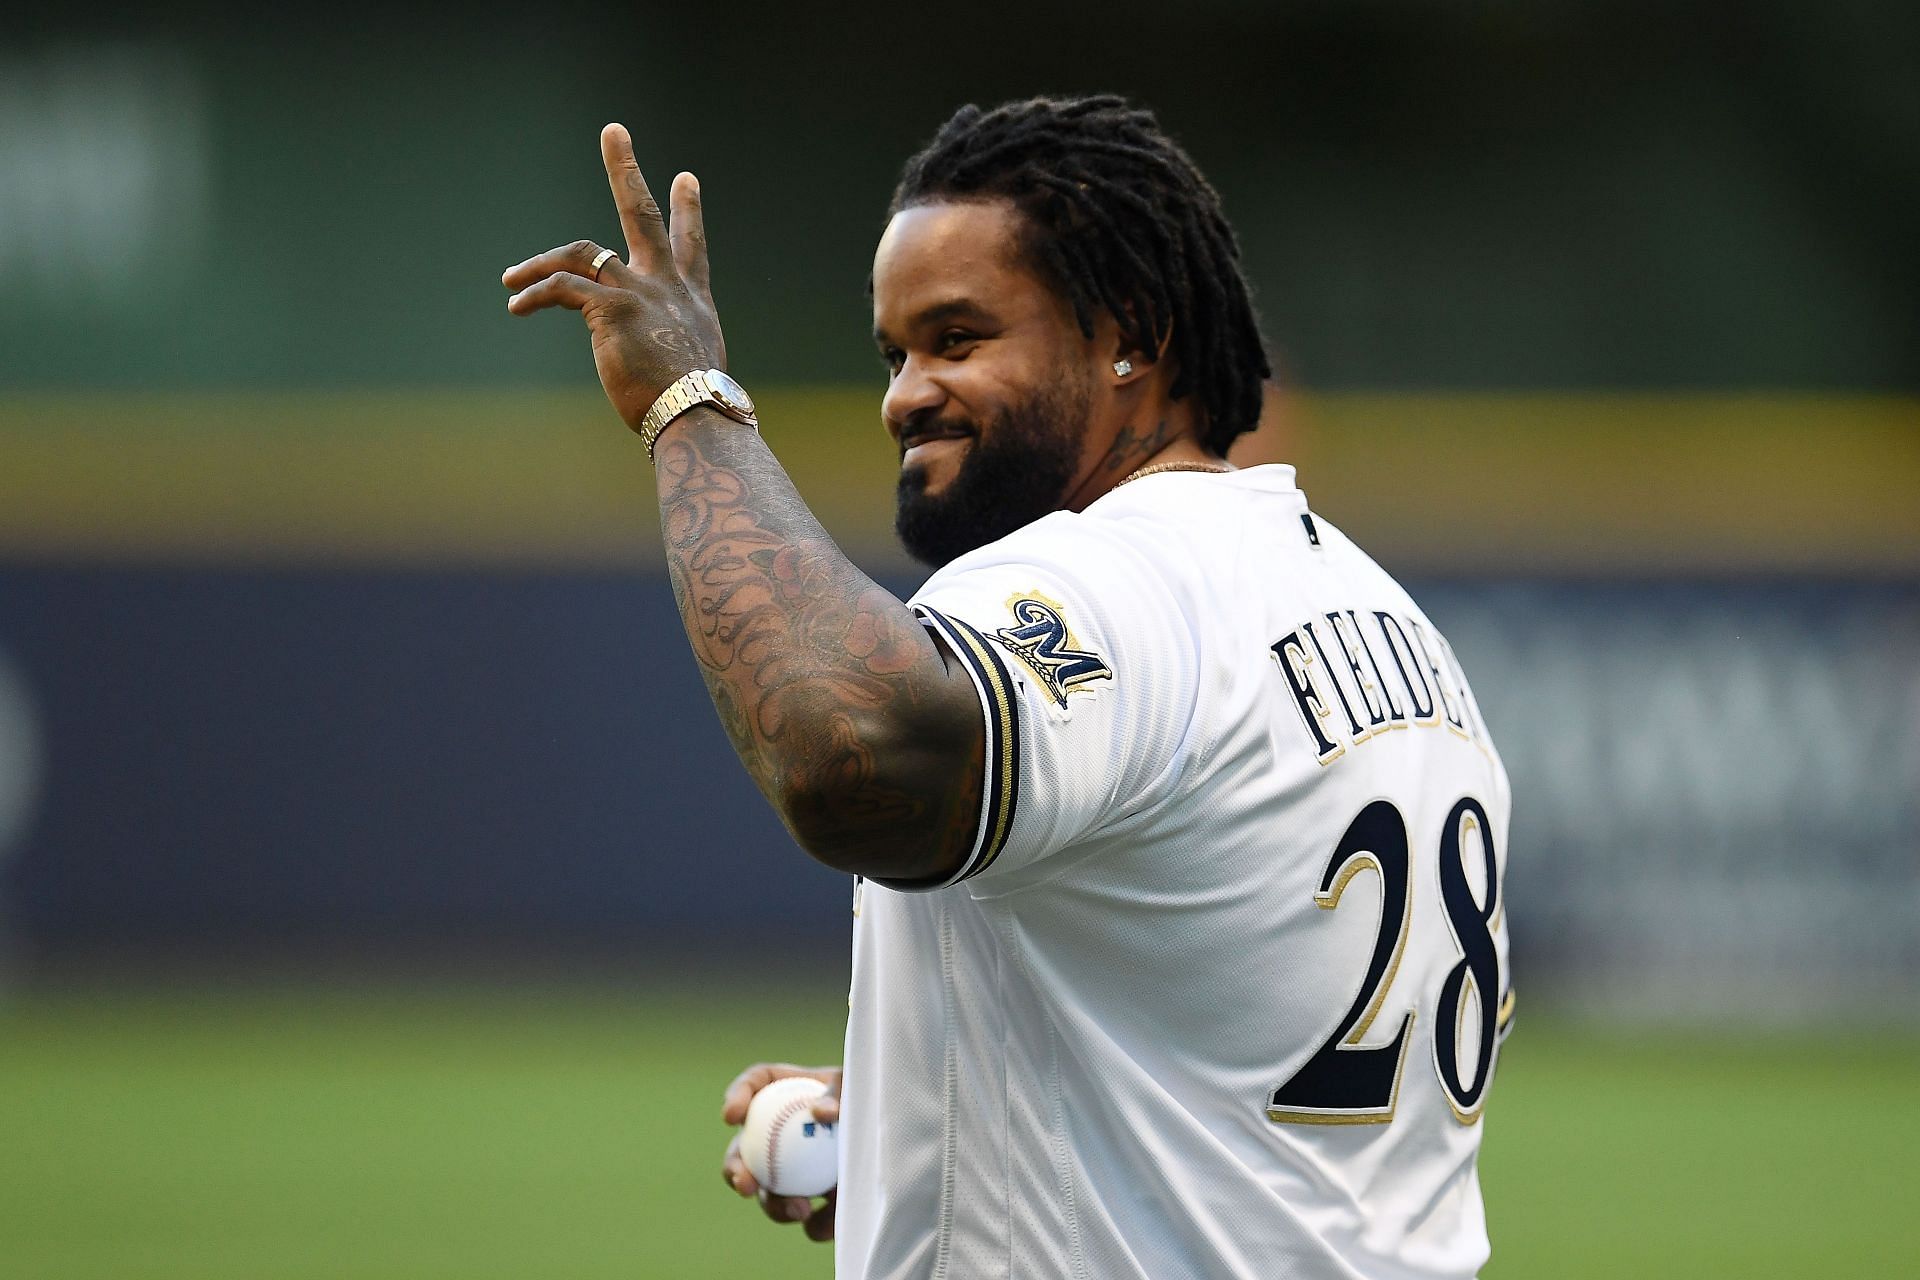 Prince Fielder played for both the Tigers and Brewers